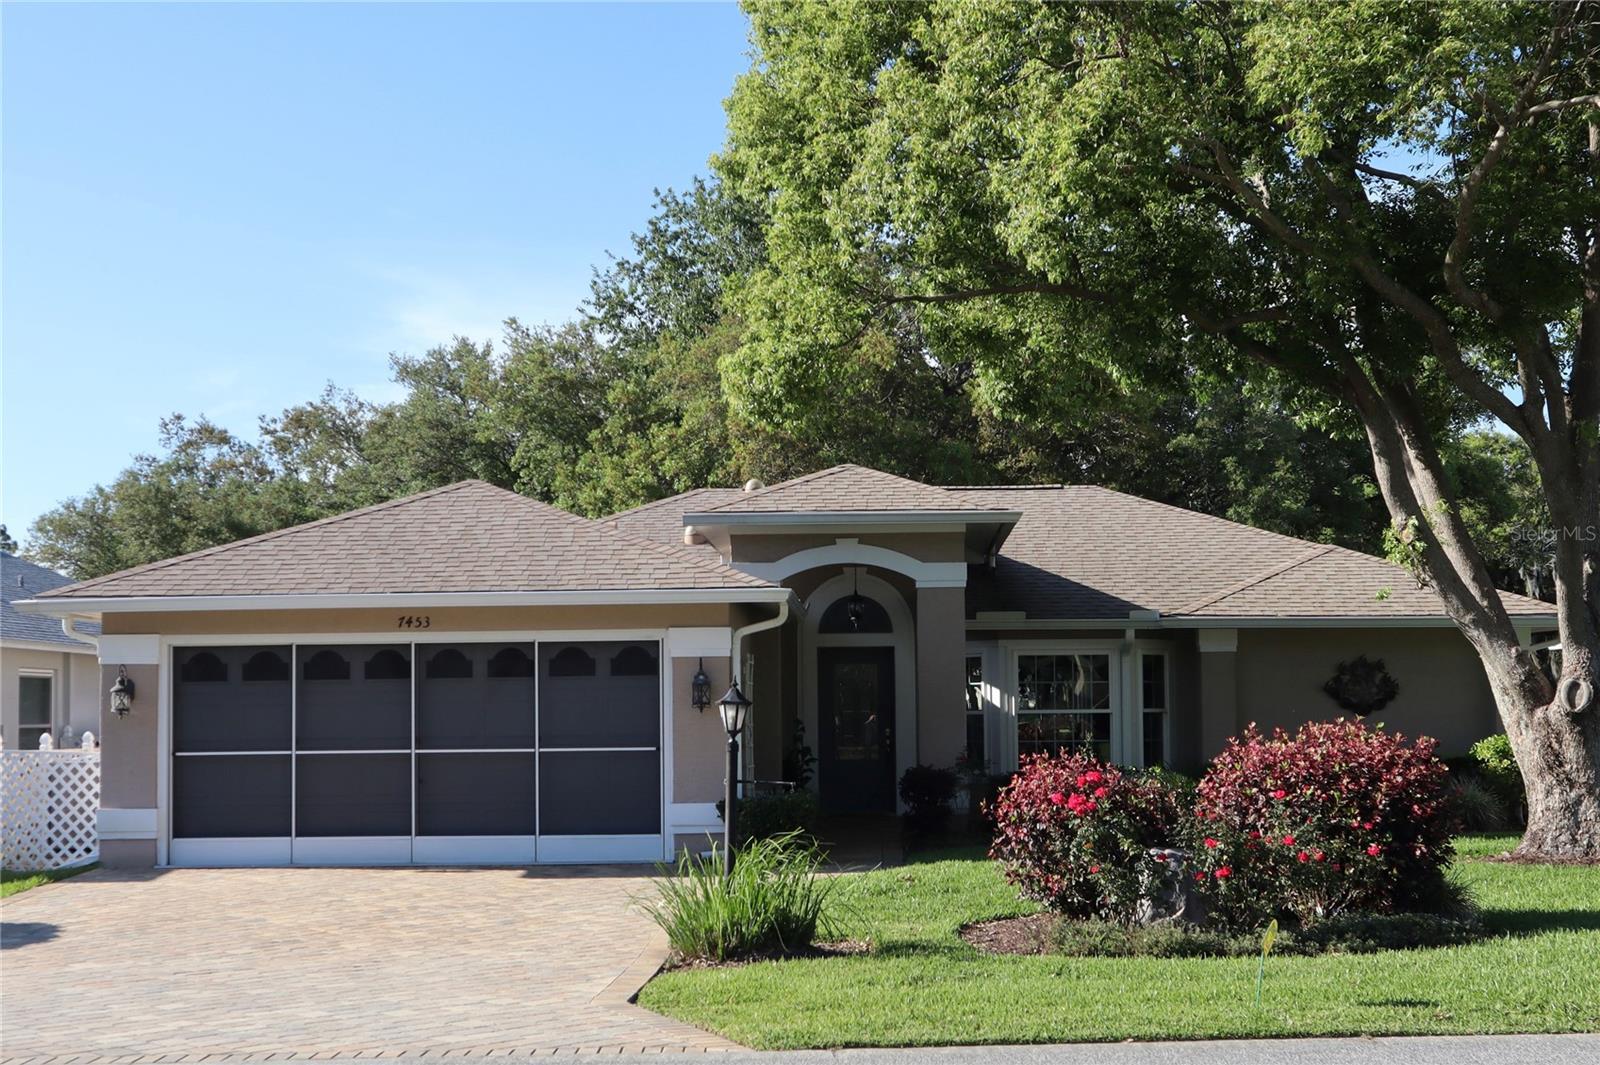 Photo one of 7453 Clearmeadow Dr Spring Hill FL 34606 | MLS W7863854